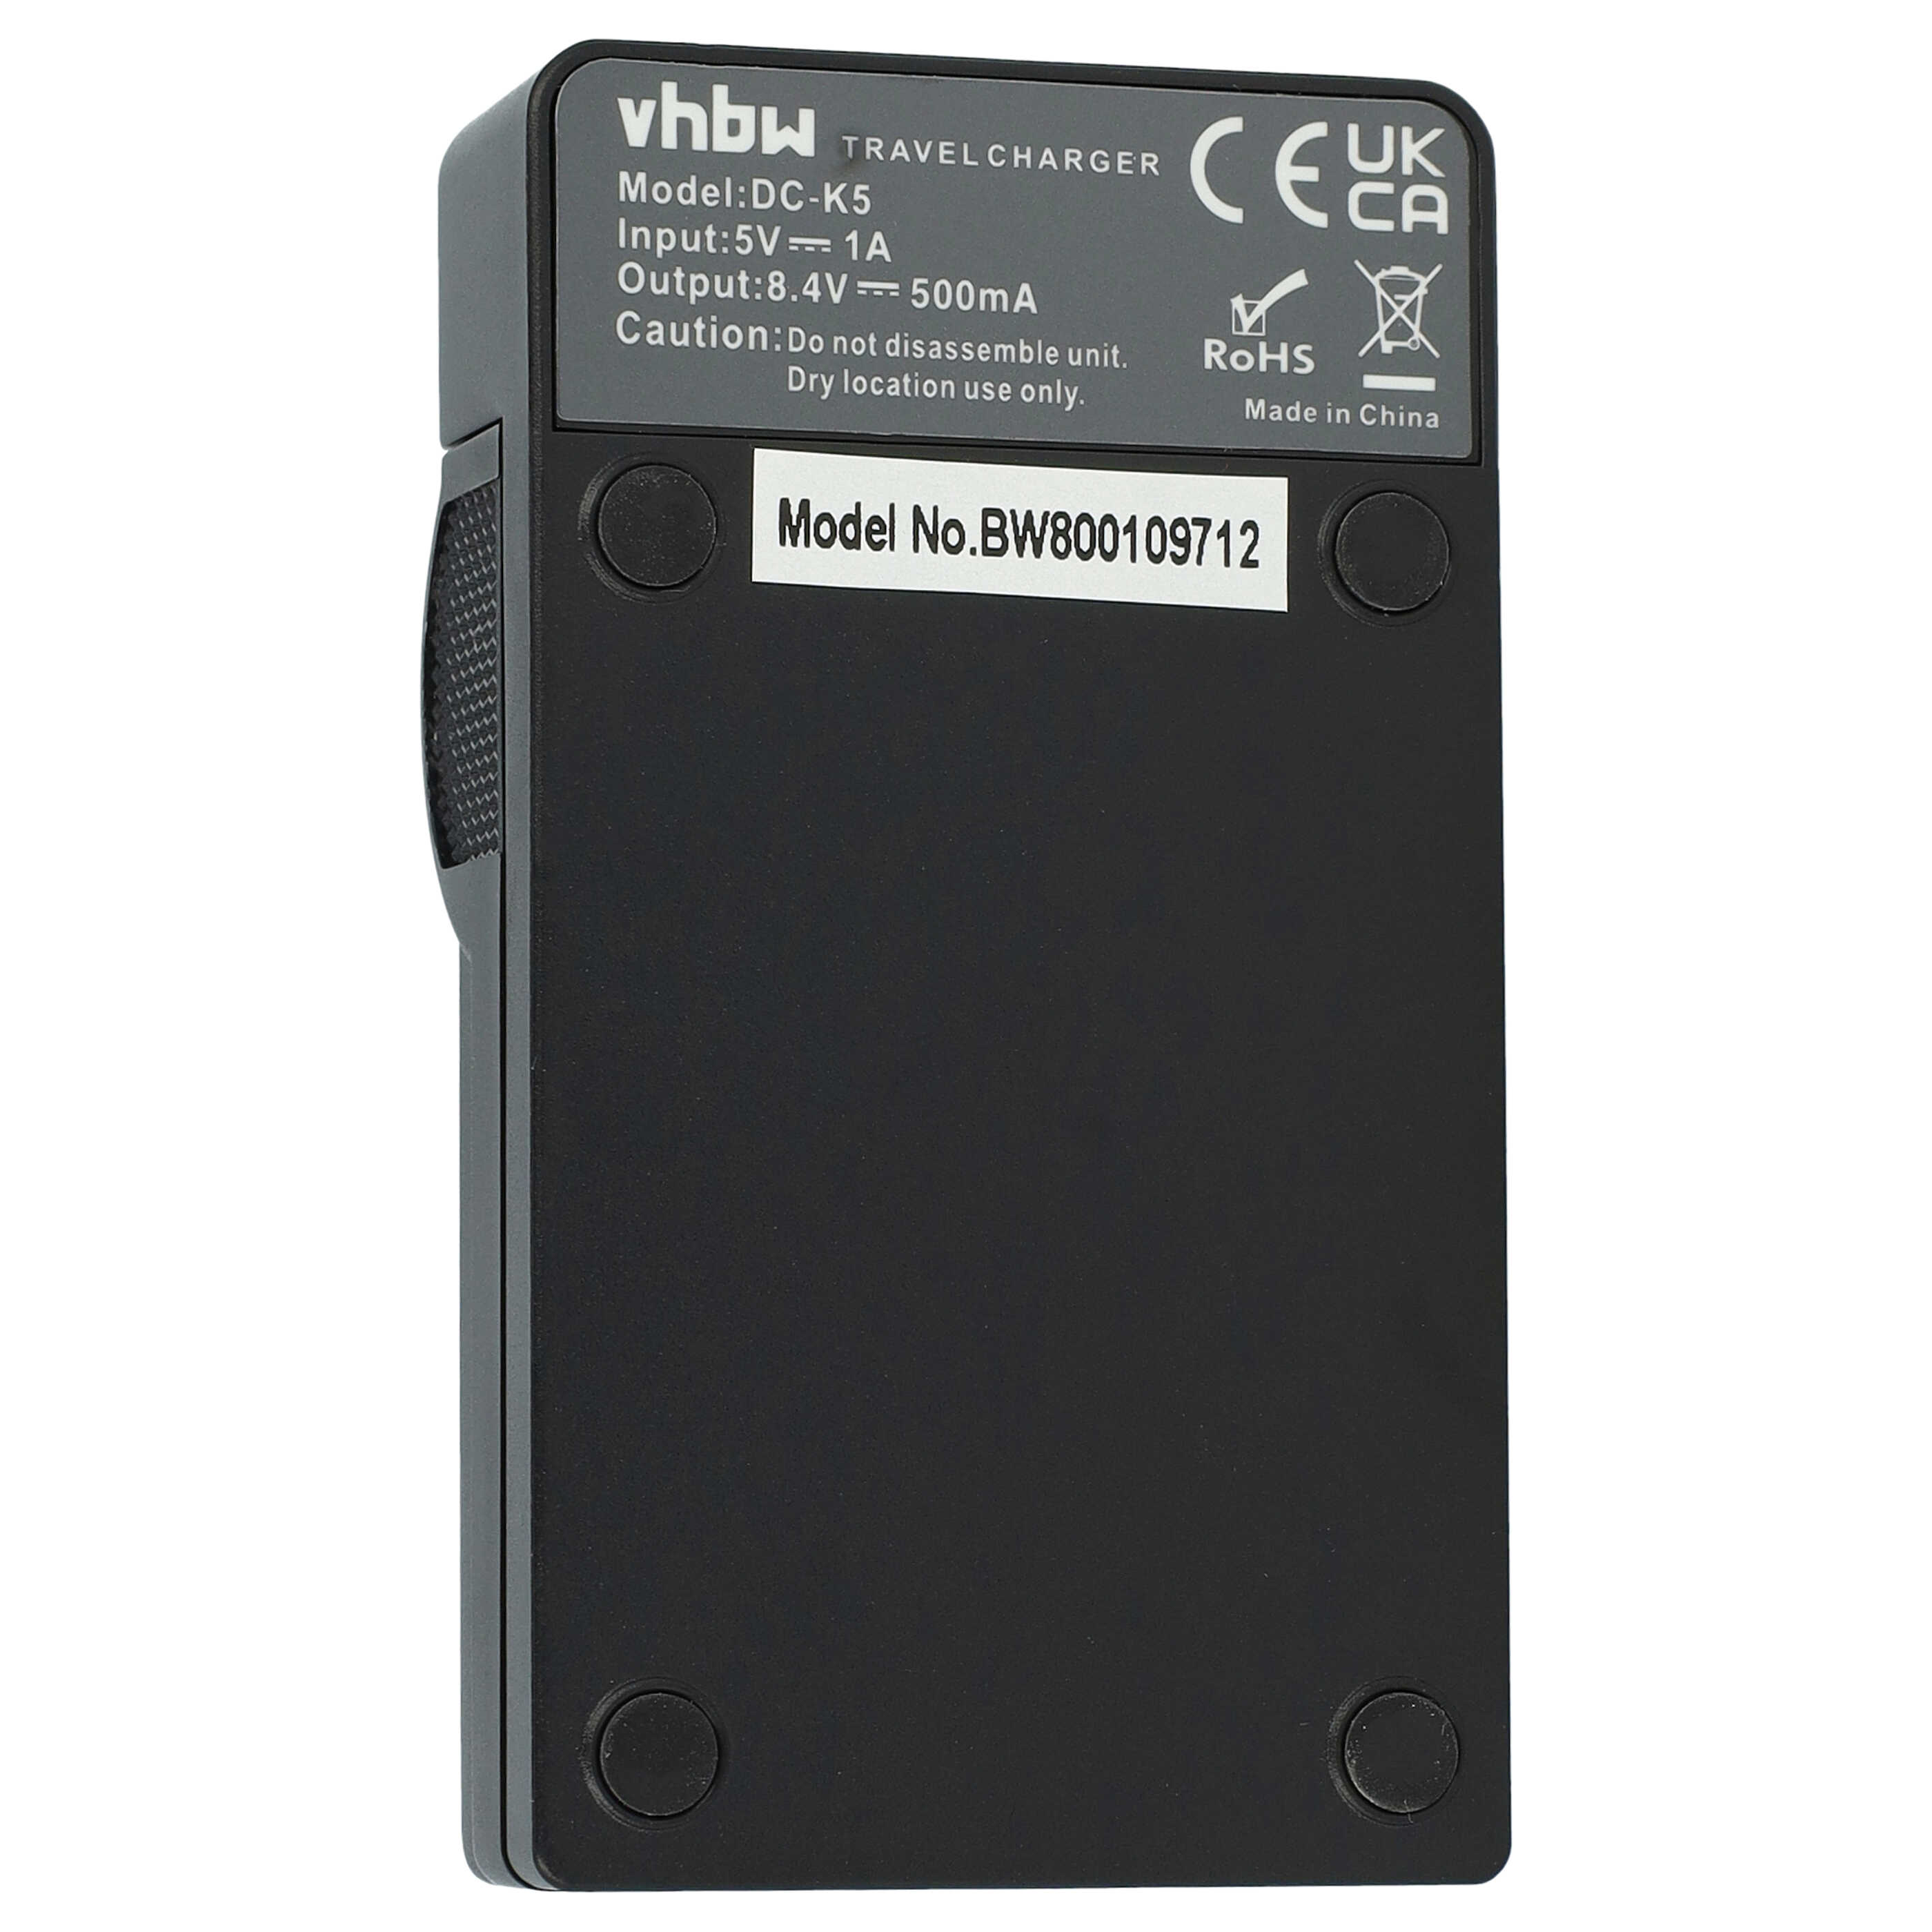 Battery Charger suitable for Panasonic VW-VBD1E Camera etc. - 0.5 A, 8.4 V